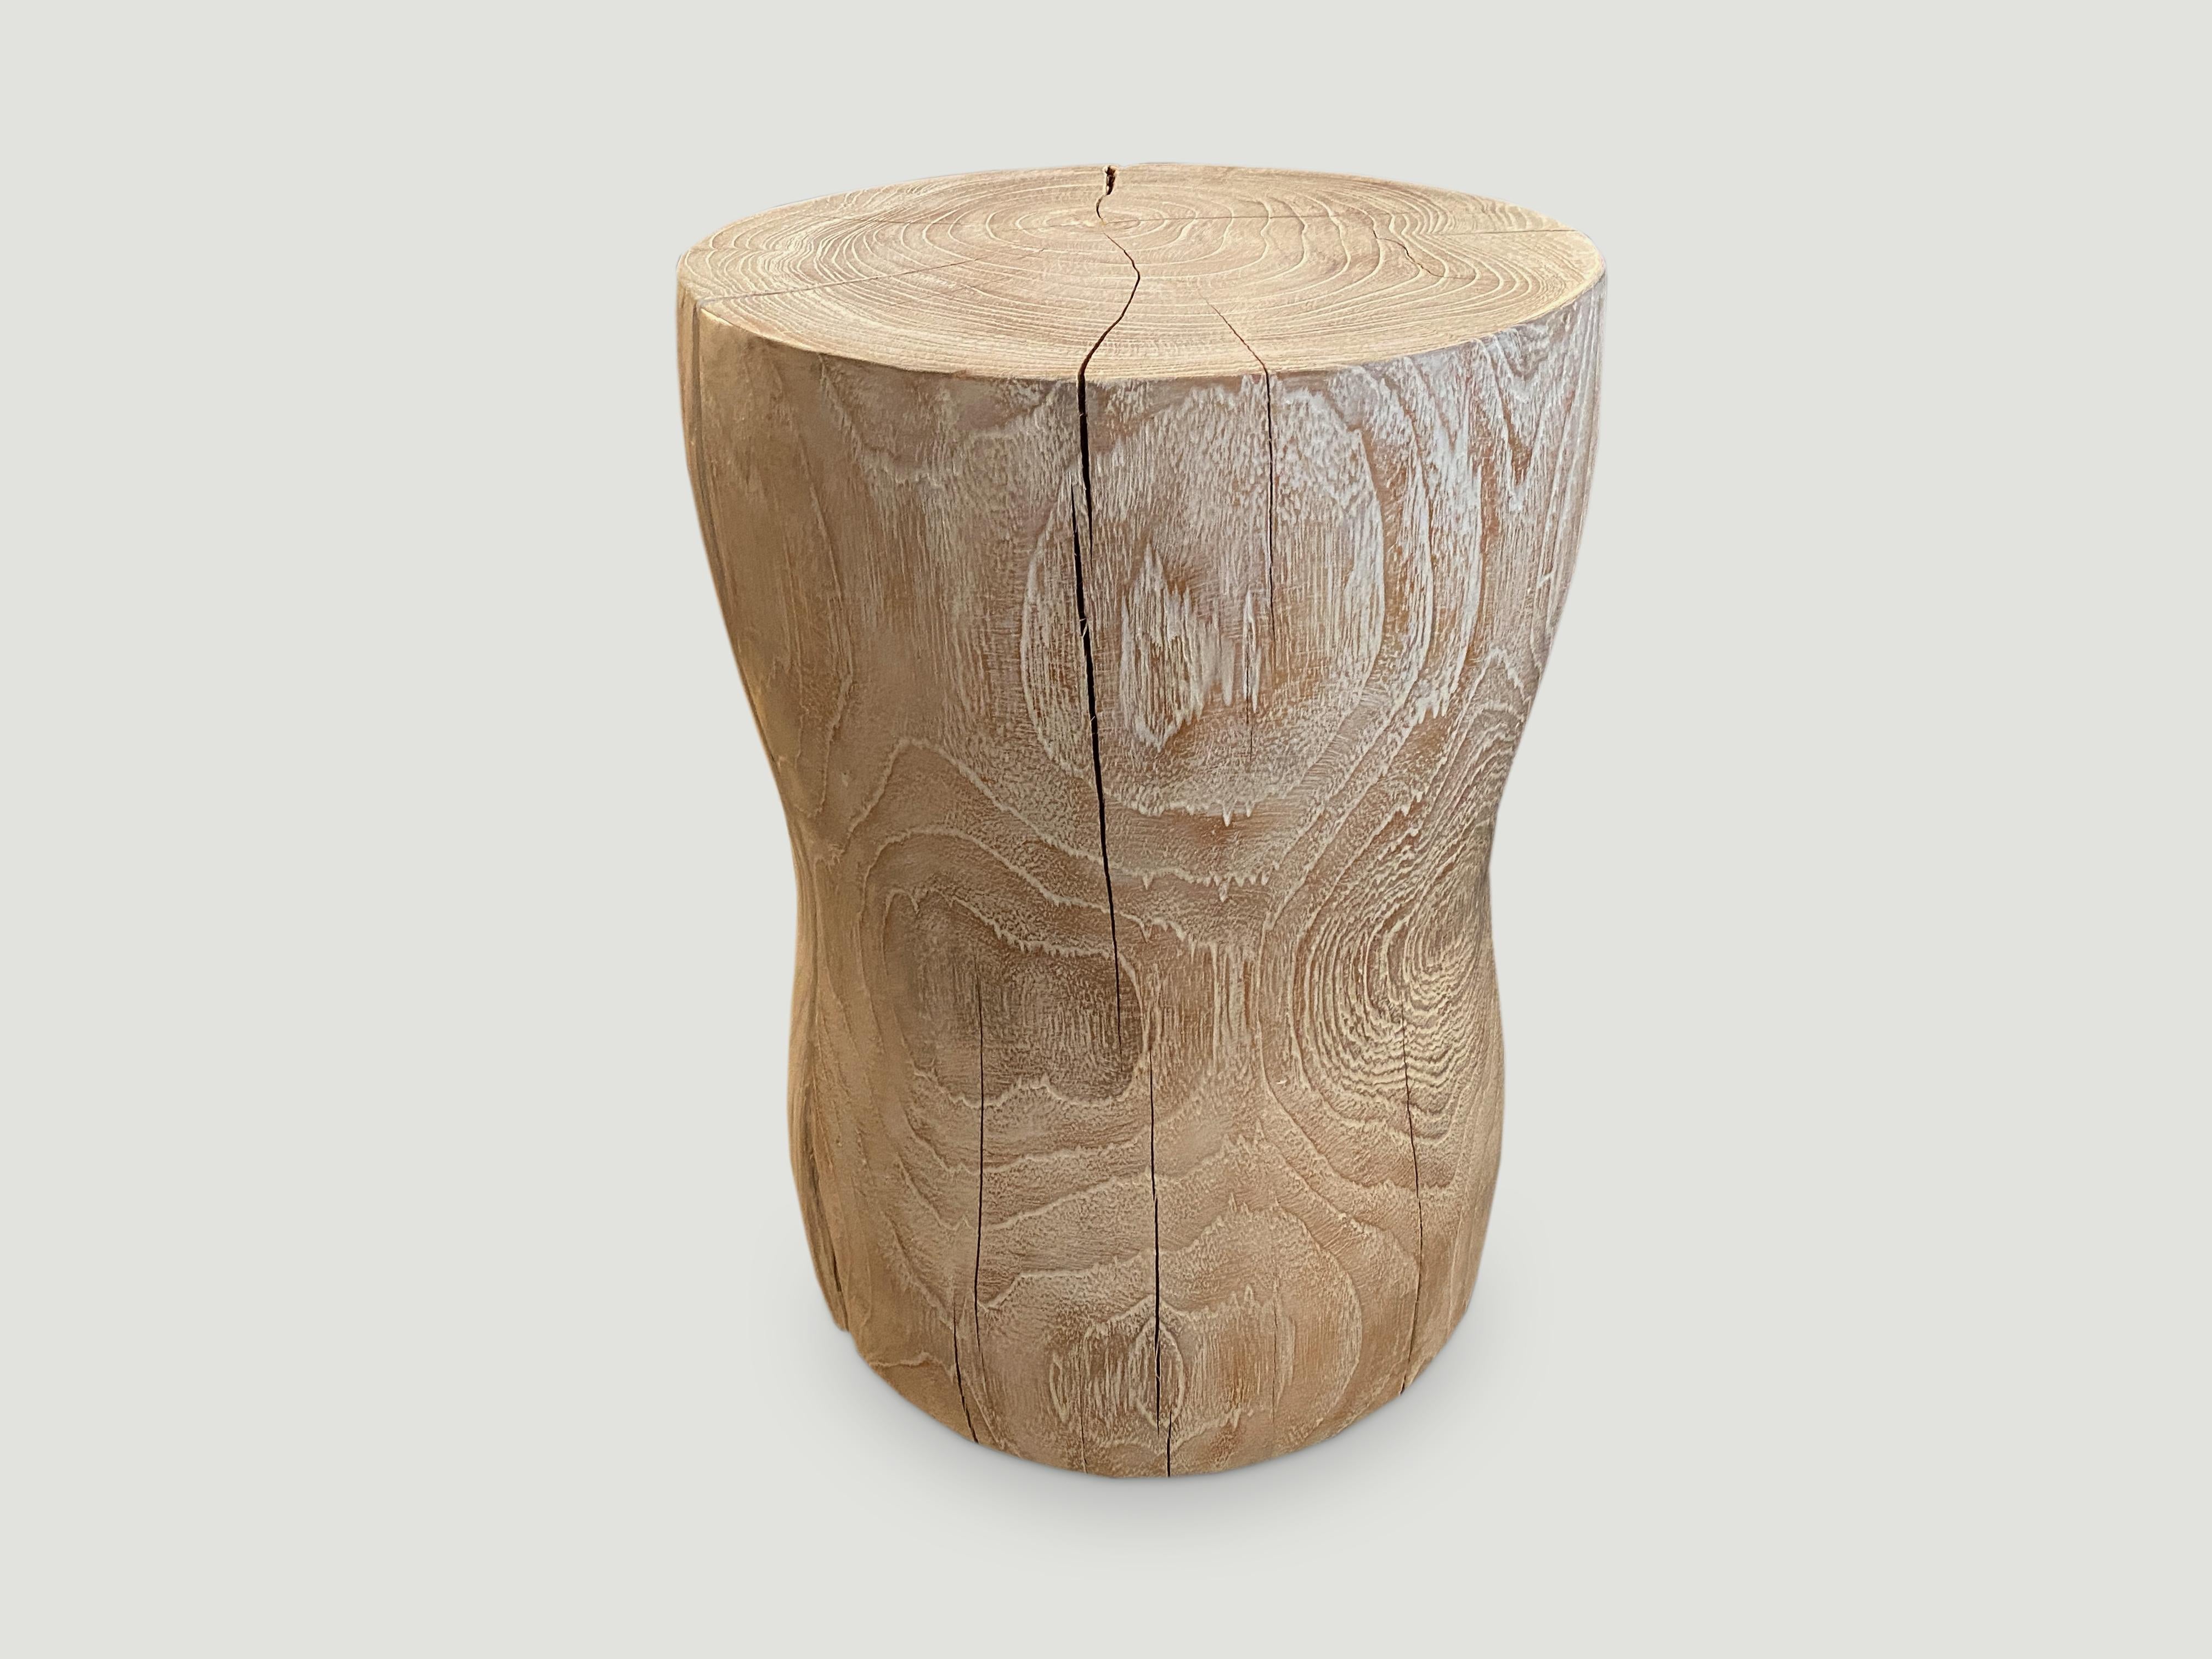 Hand carved teak side table or stool with a subtle smooth hourglass shape that celebrates the cracks and crevices found in reclaimed teak. This style works well in a variety of interior settings such as seating or side tables, as shown in the bottom